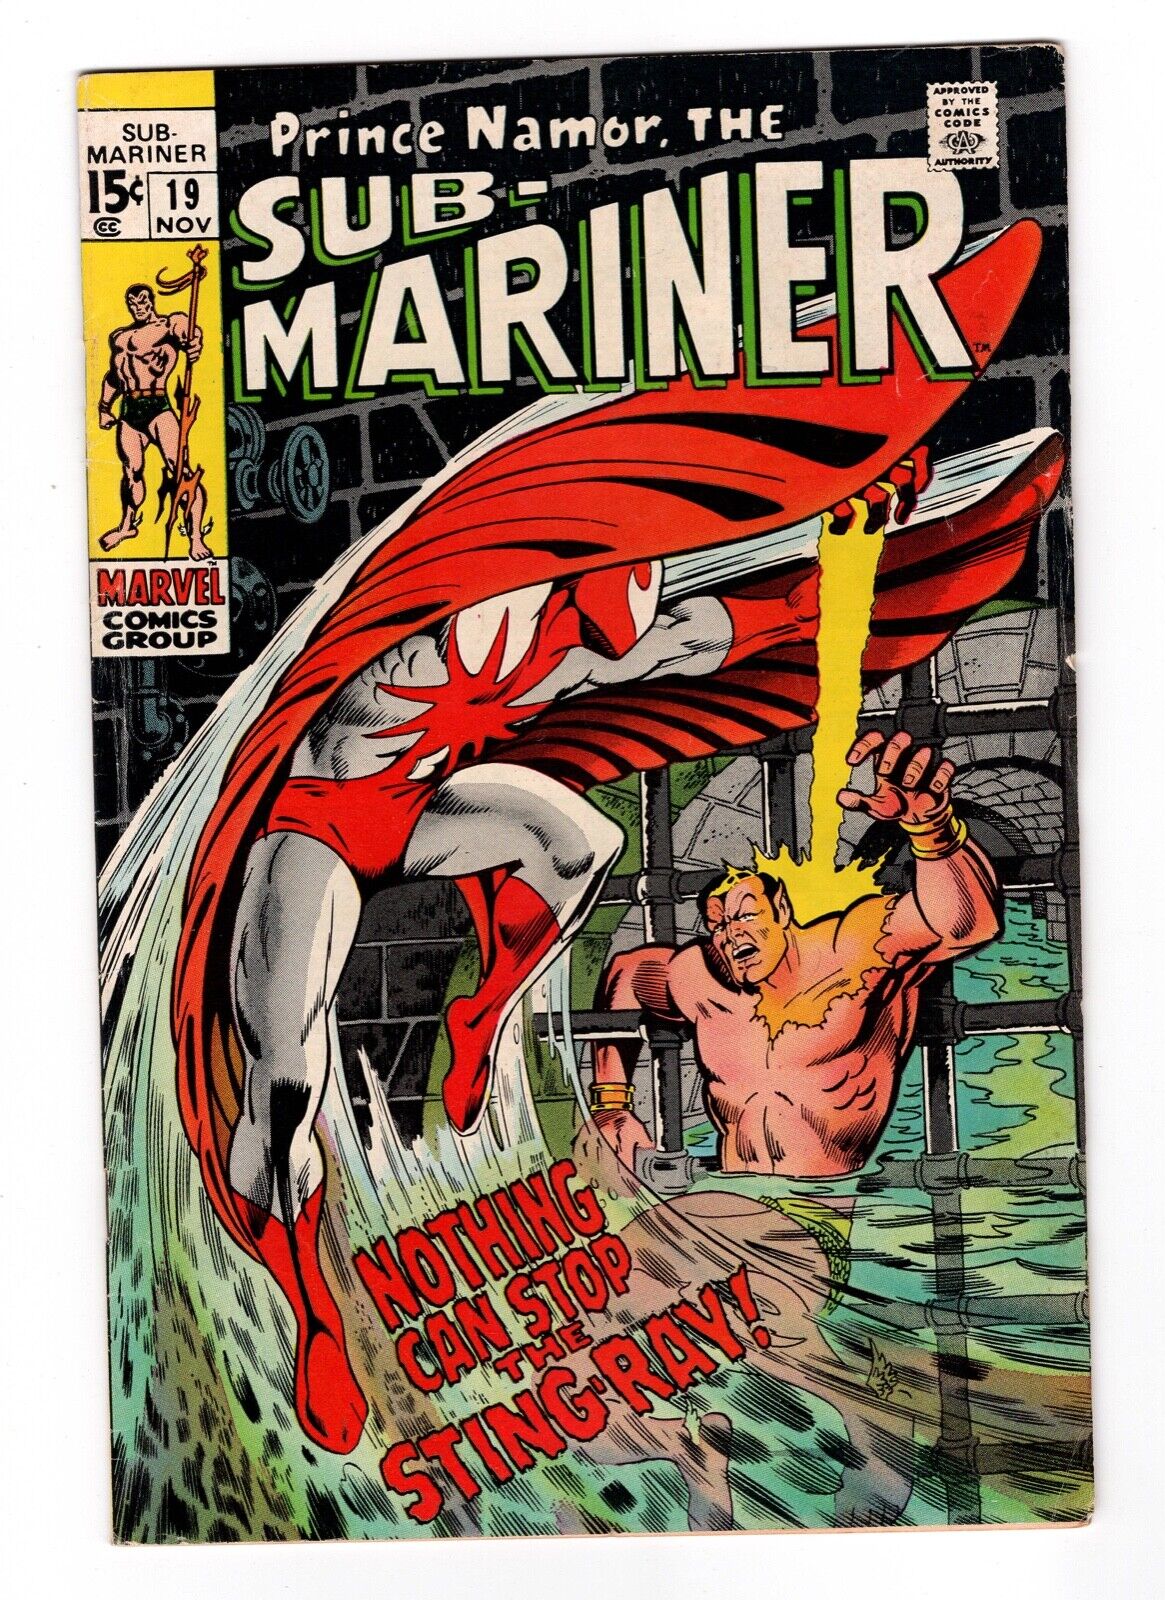 Sub-Mariner #19, FN+ 6.5, 1st Appearance of Sting-Ray